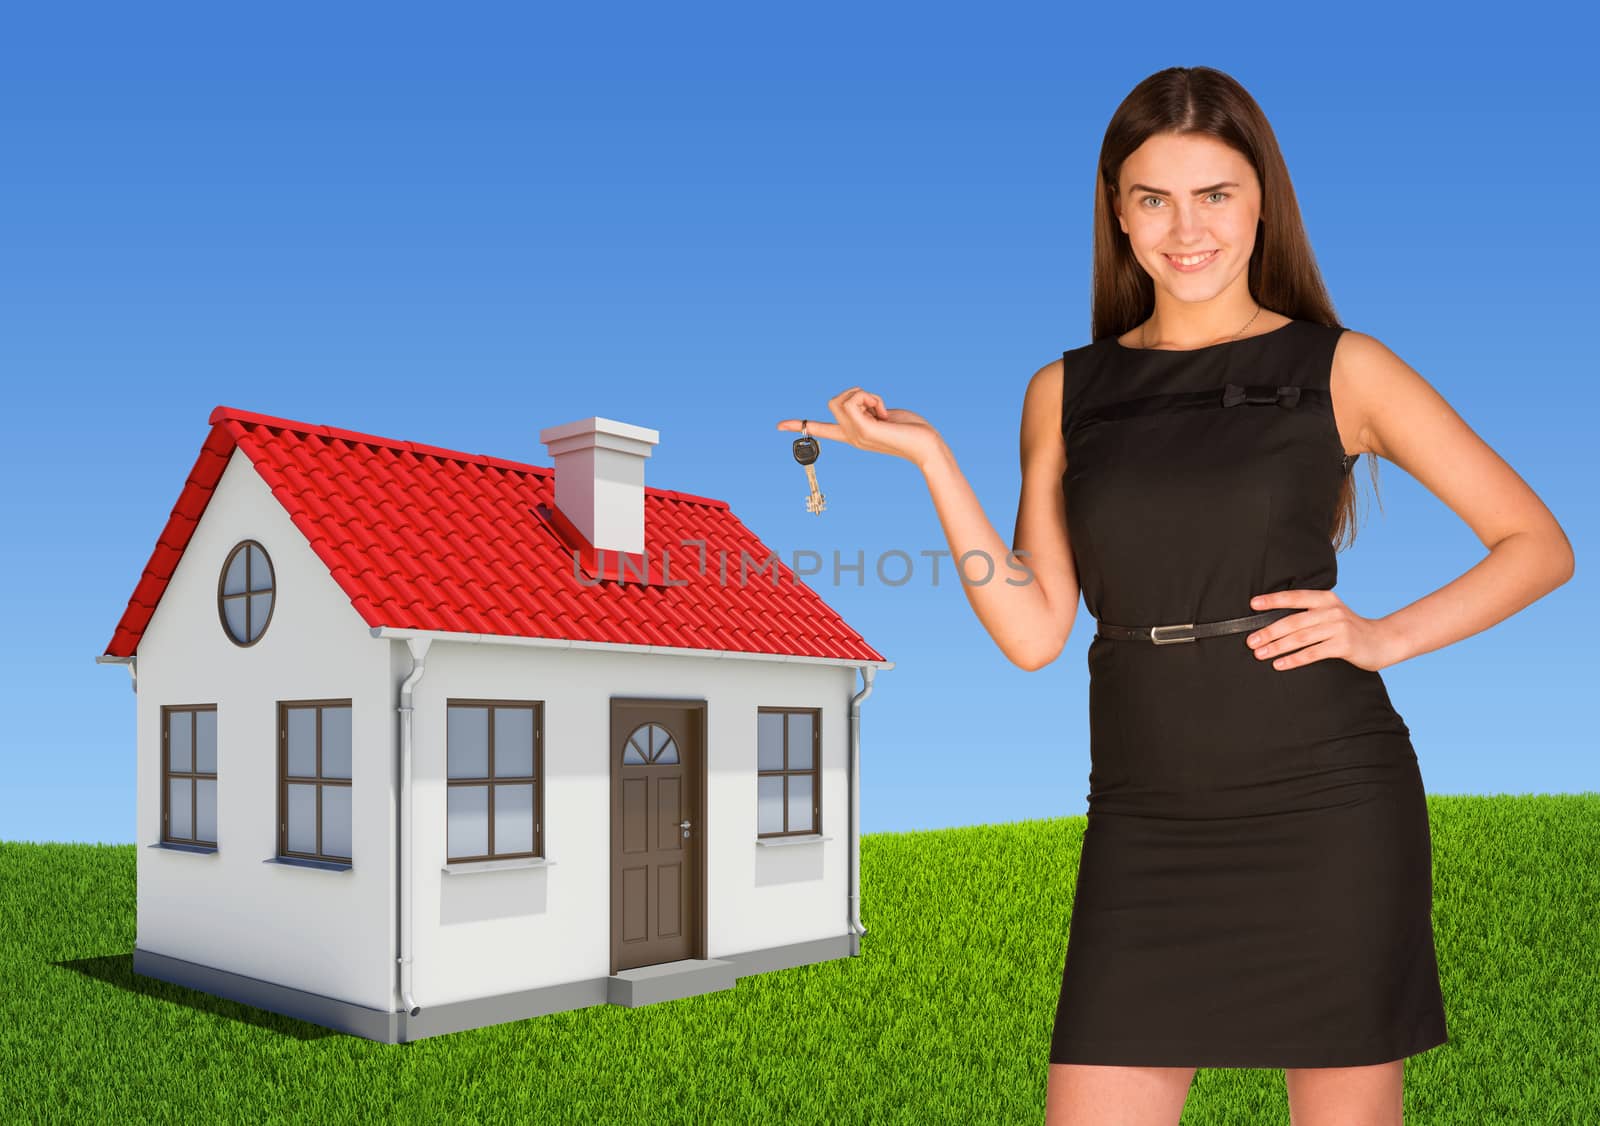 Businesswoman pointing at house, showing key. Green lawn and sky as backdrop